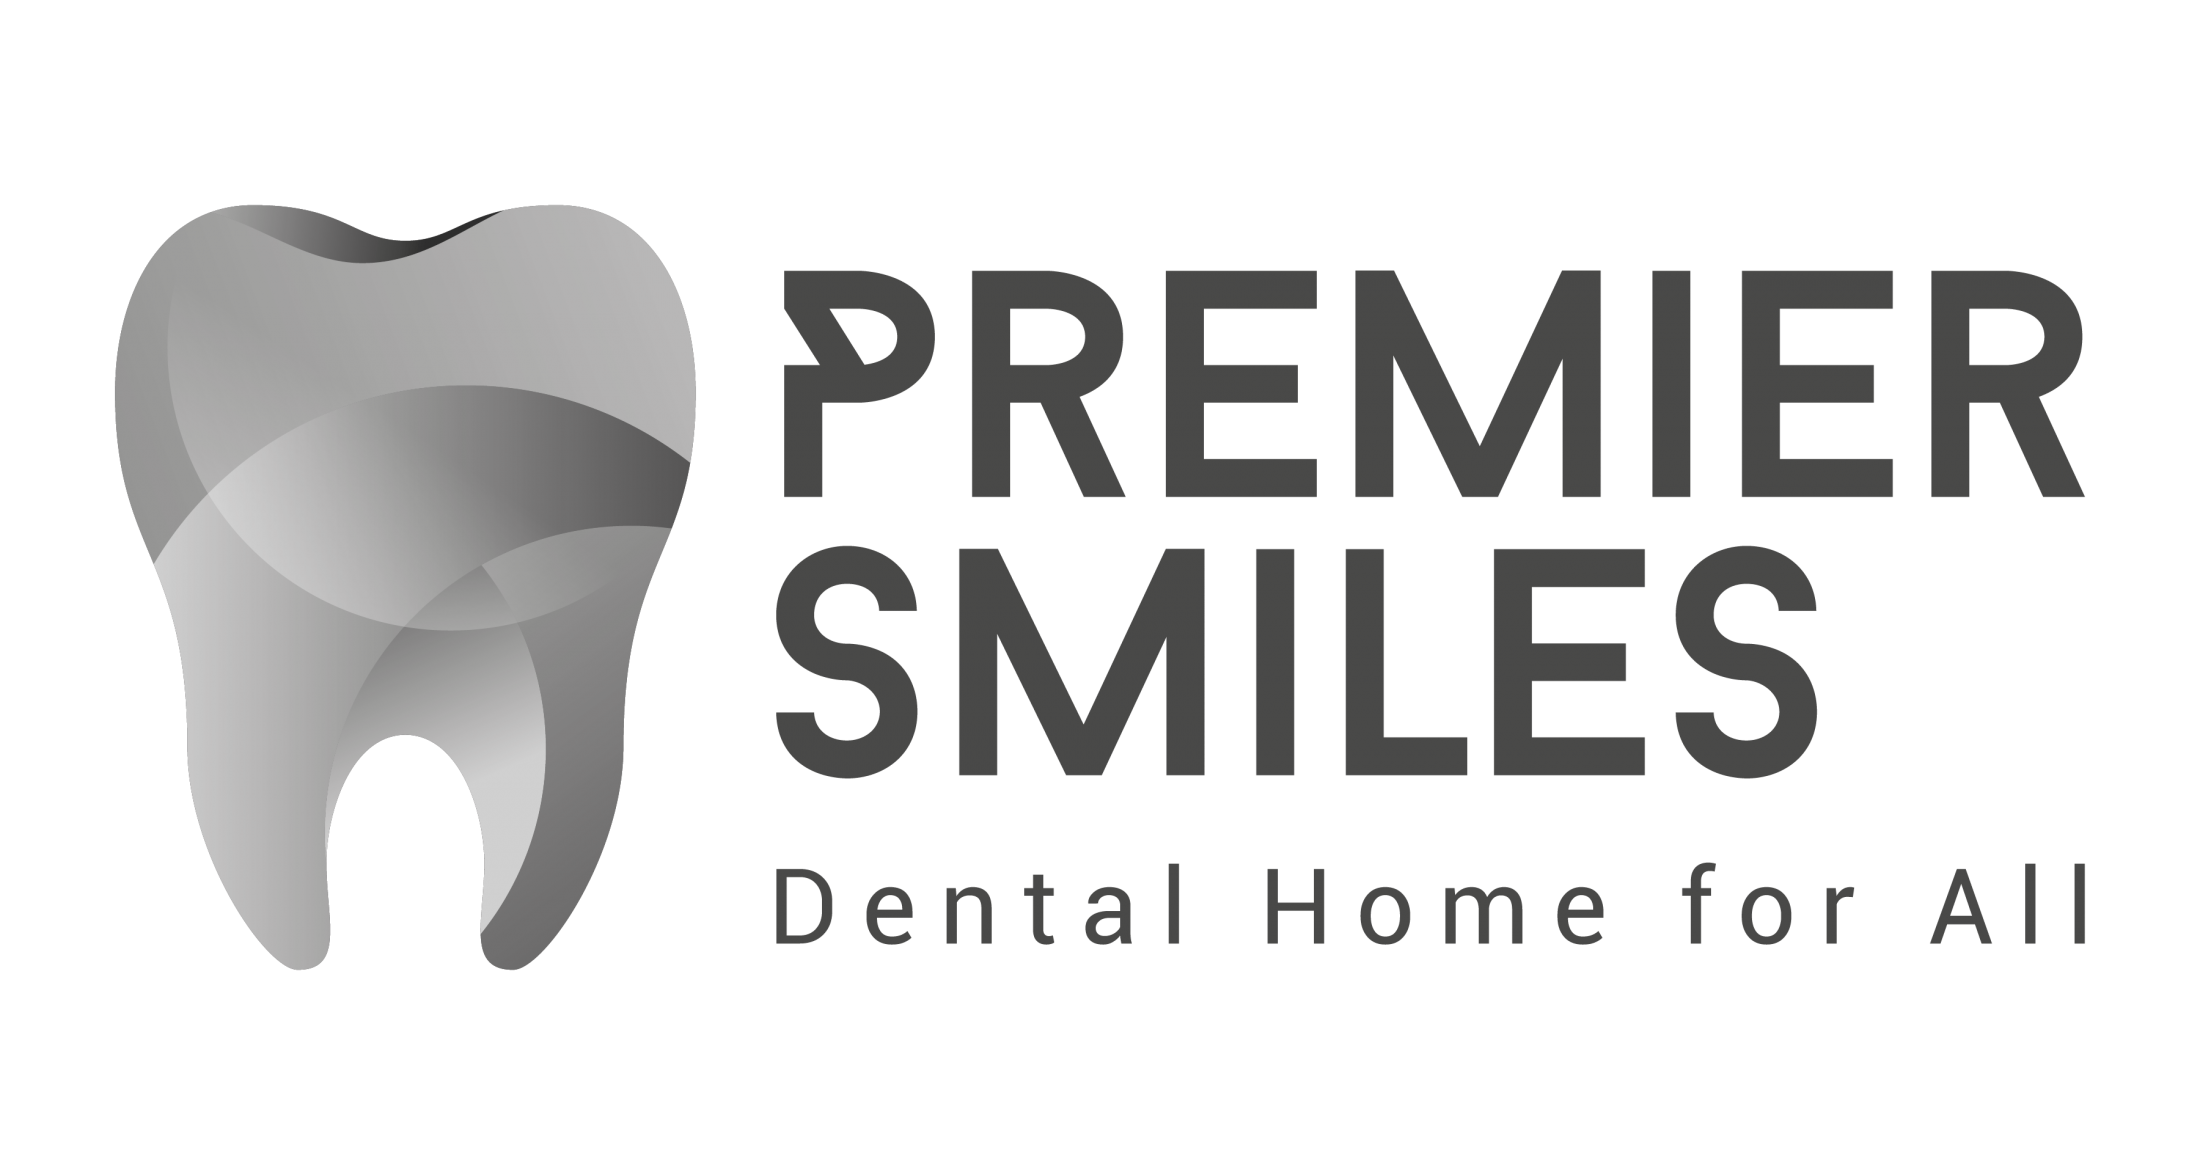 Link to Premier Smiles home page